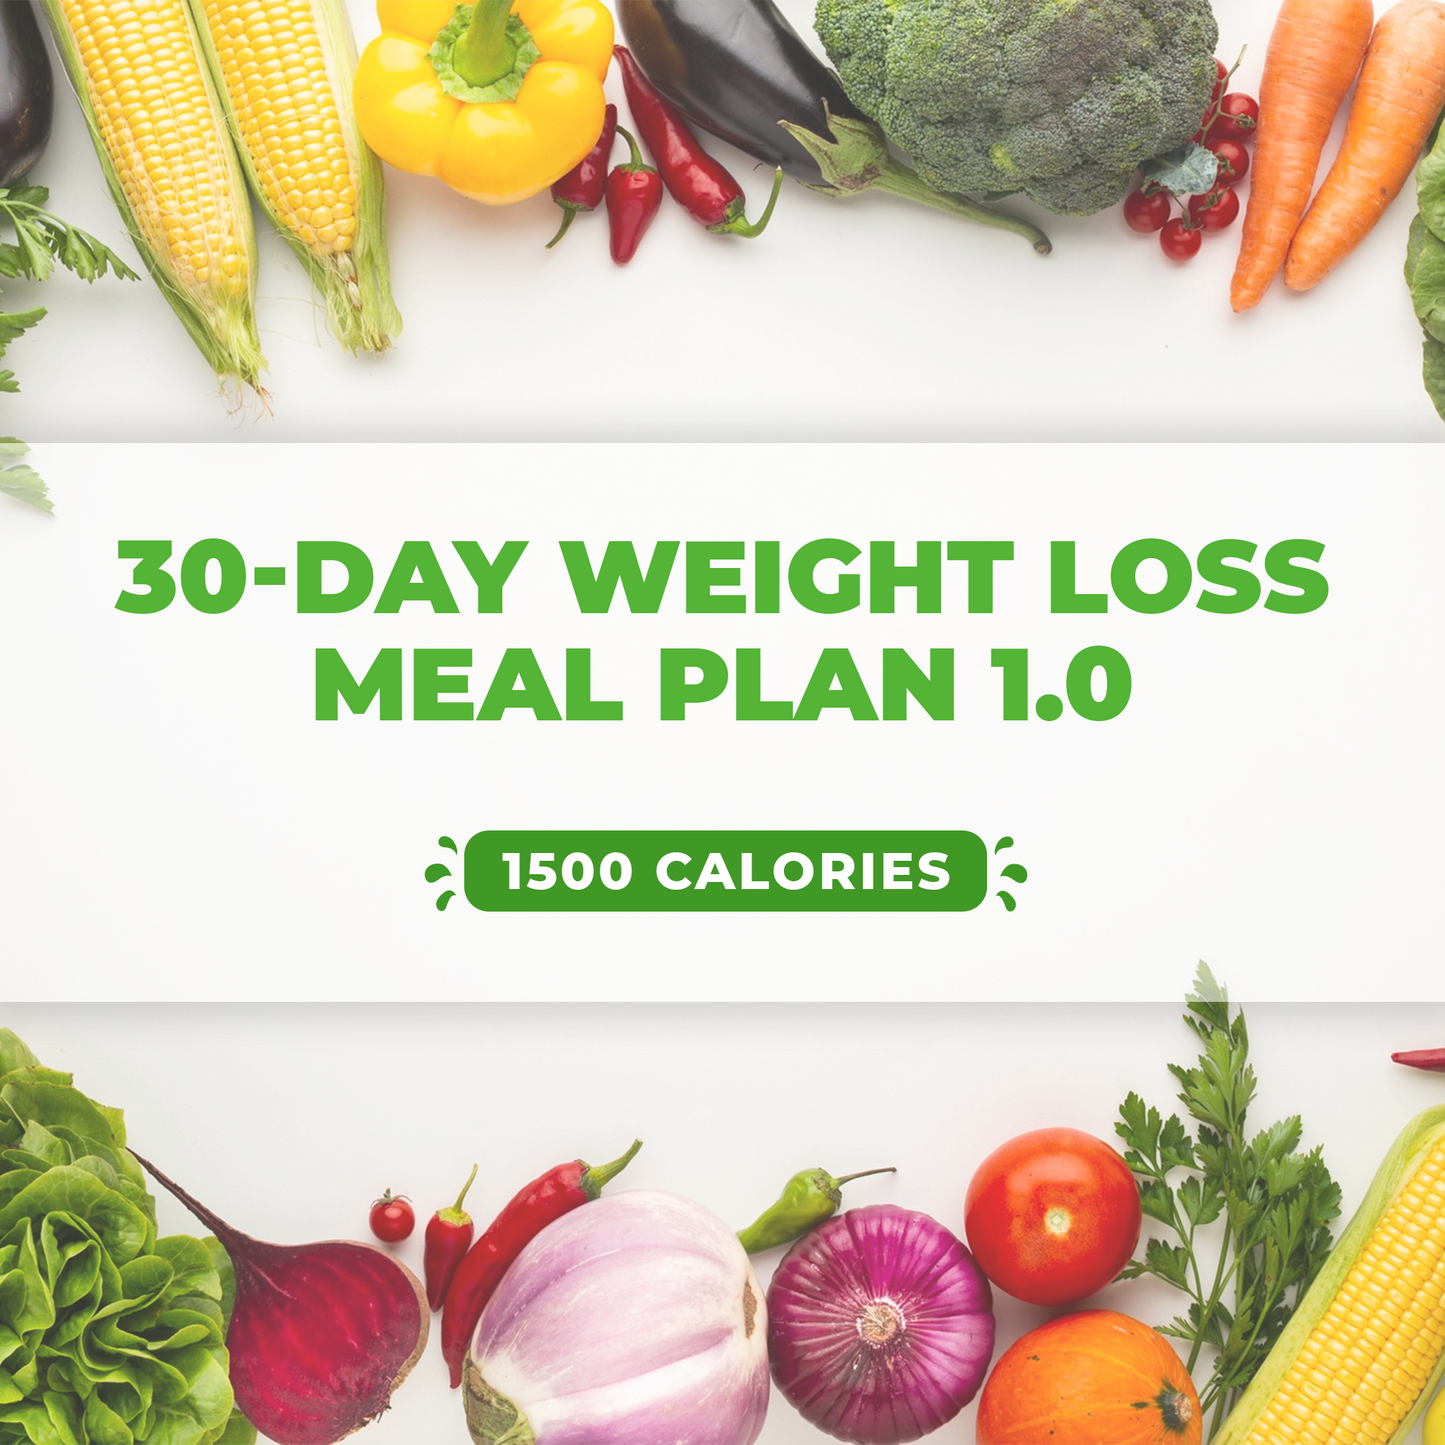 30-Day Weight Loss Meal Plan 1.0 (1500 Calories)